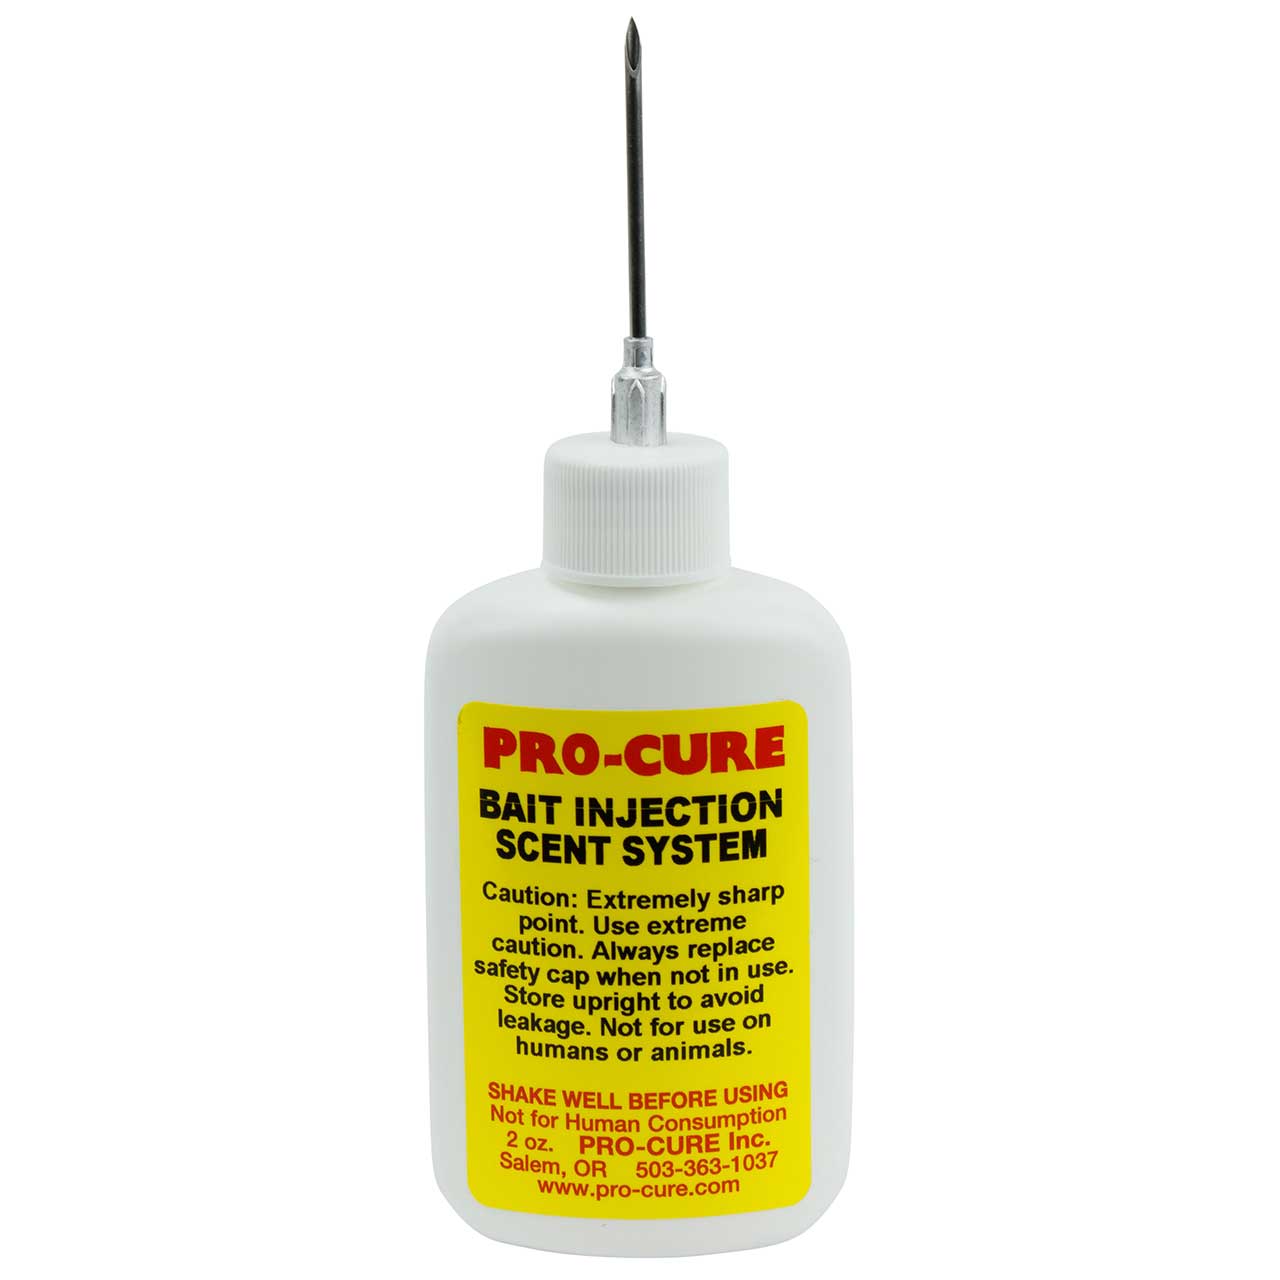 Pro-Cure Bait Injector Caps with Needles